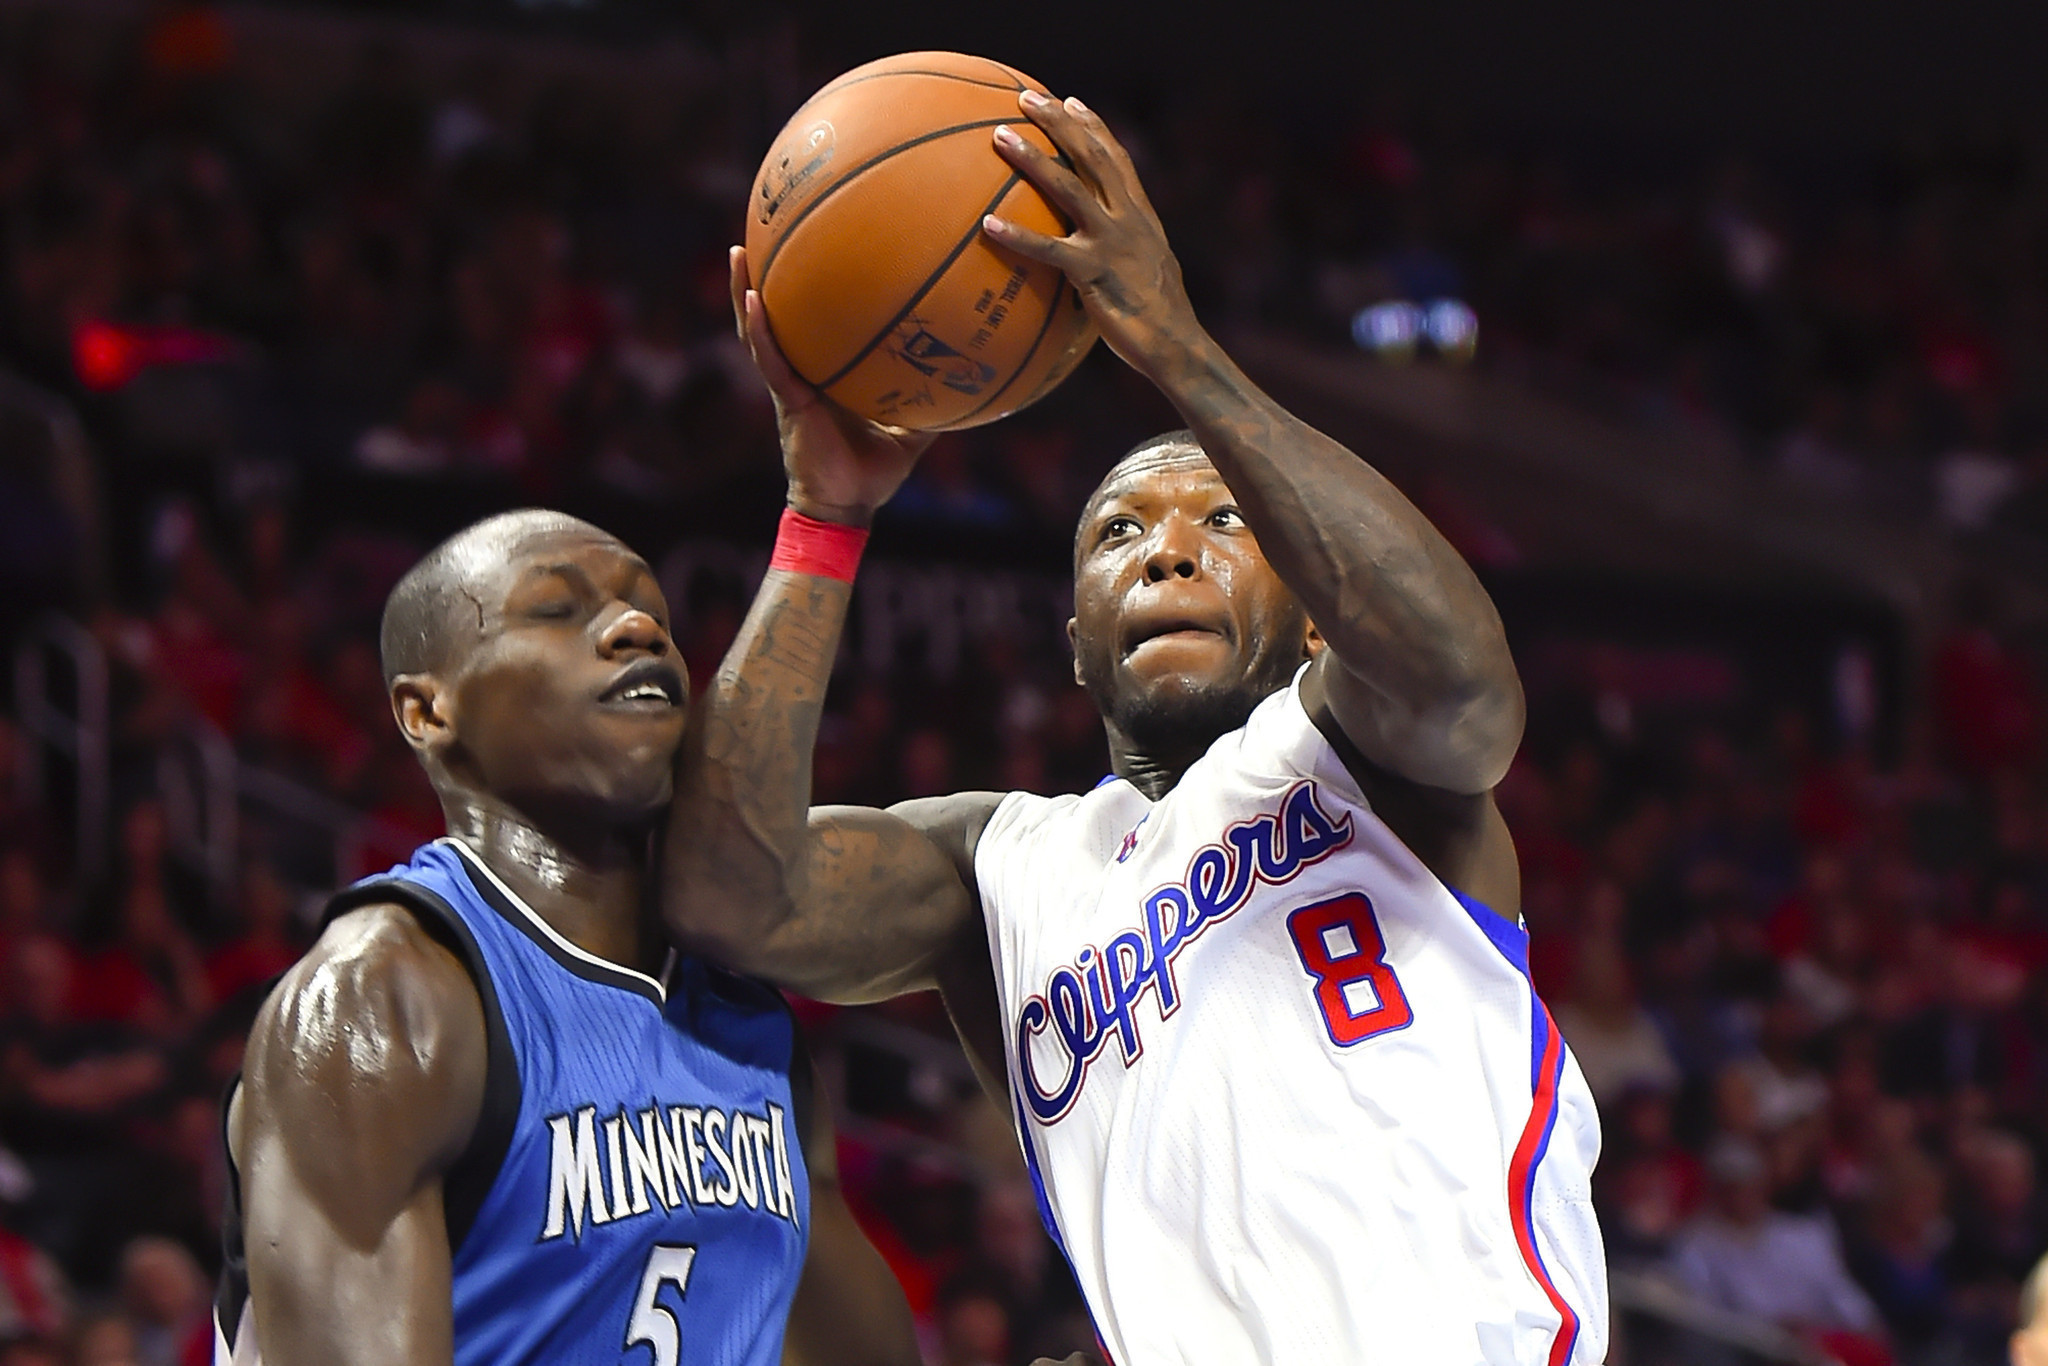 NBA free agent Nate Robinson intends to try out for NFL teams - LA Times2048 x 1366